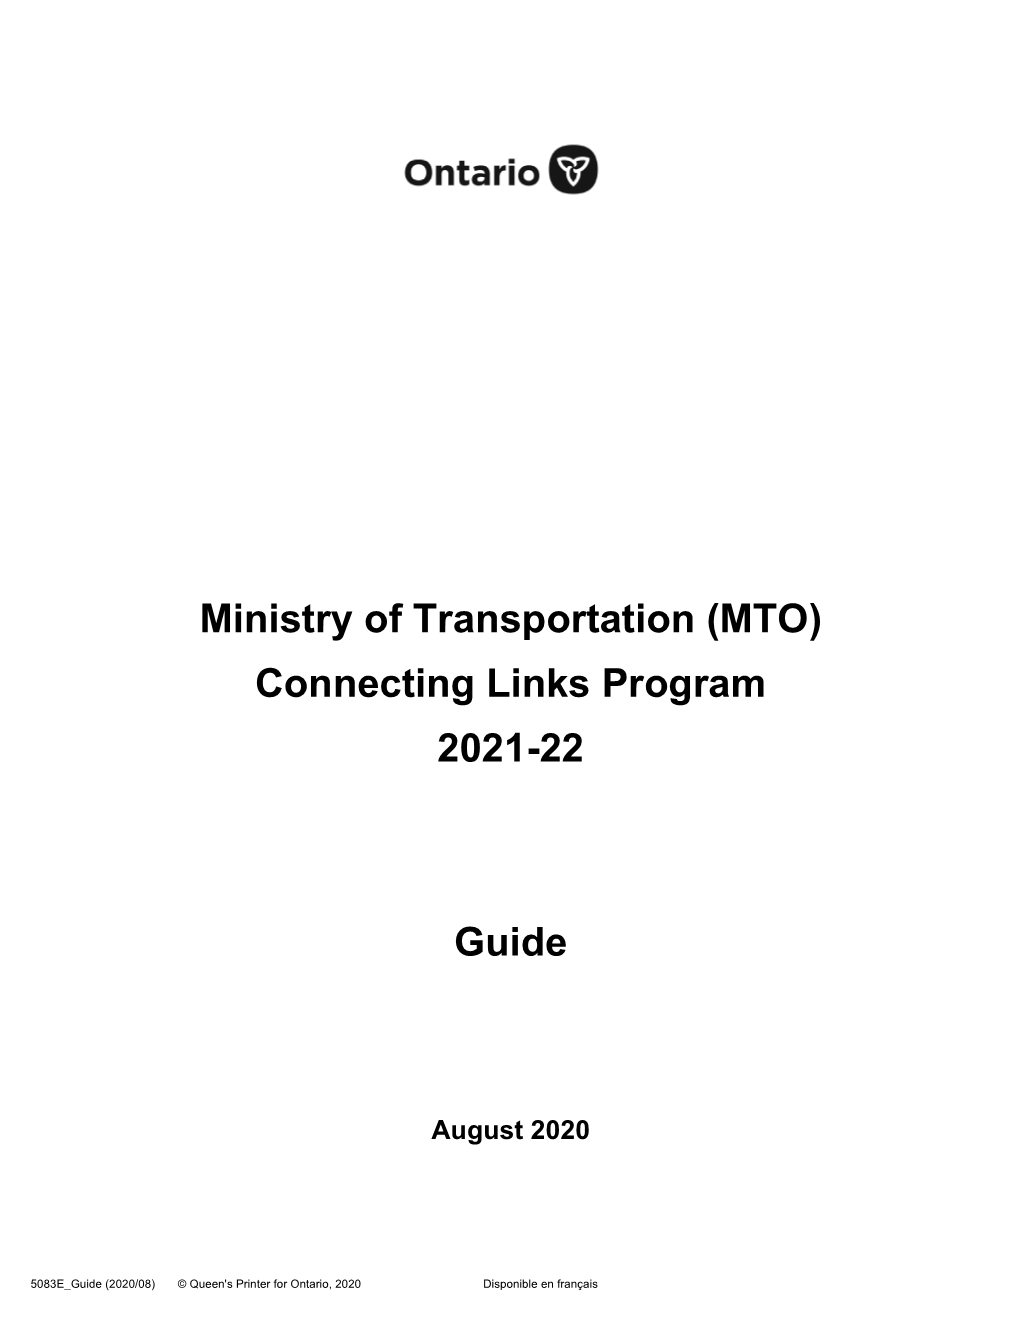 MTO Connecting Link Program Guide